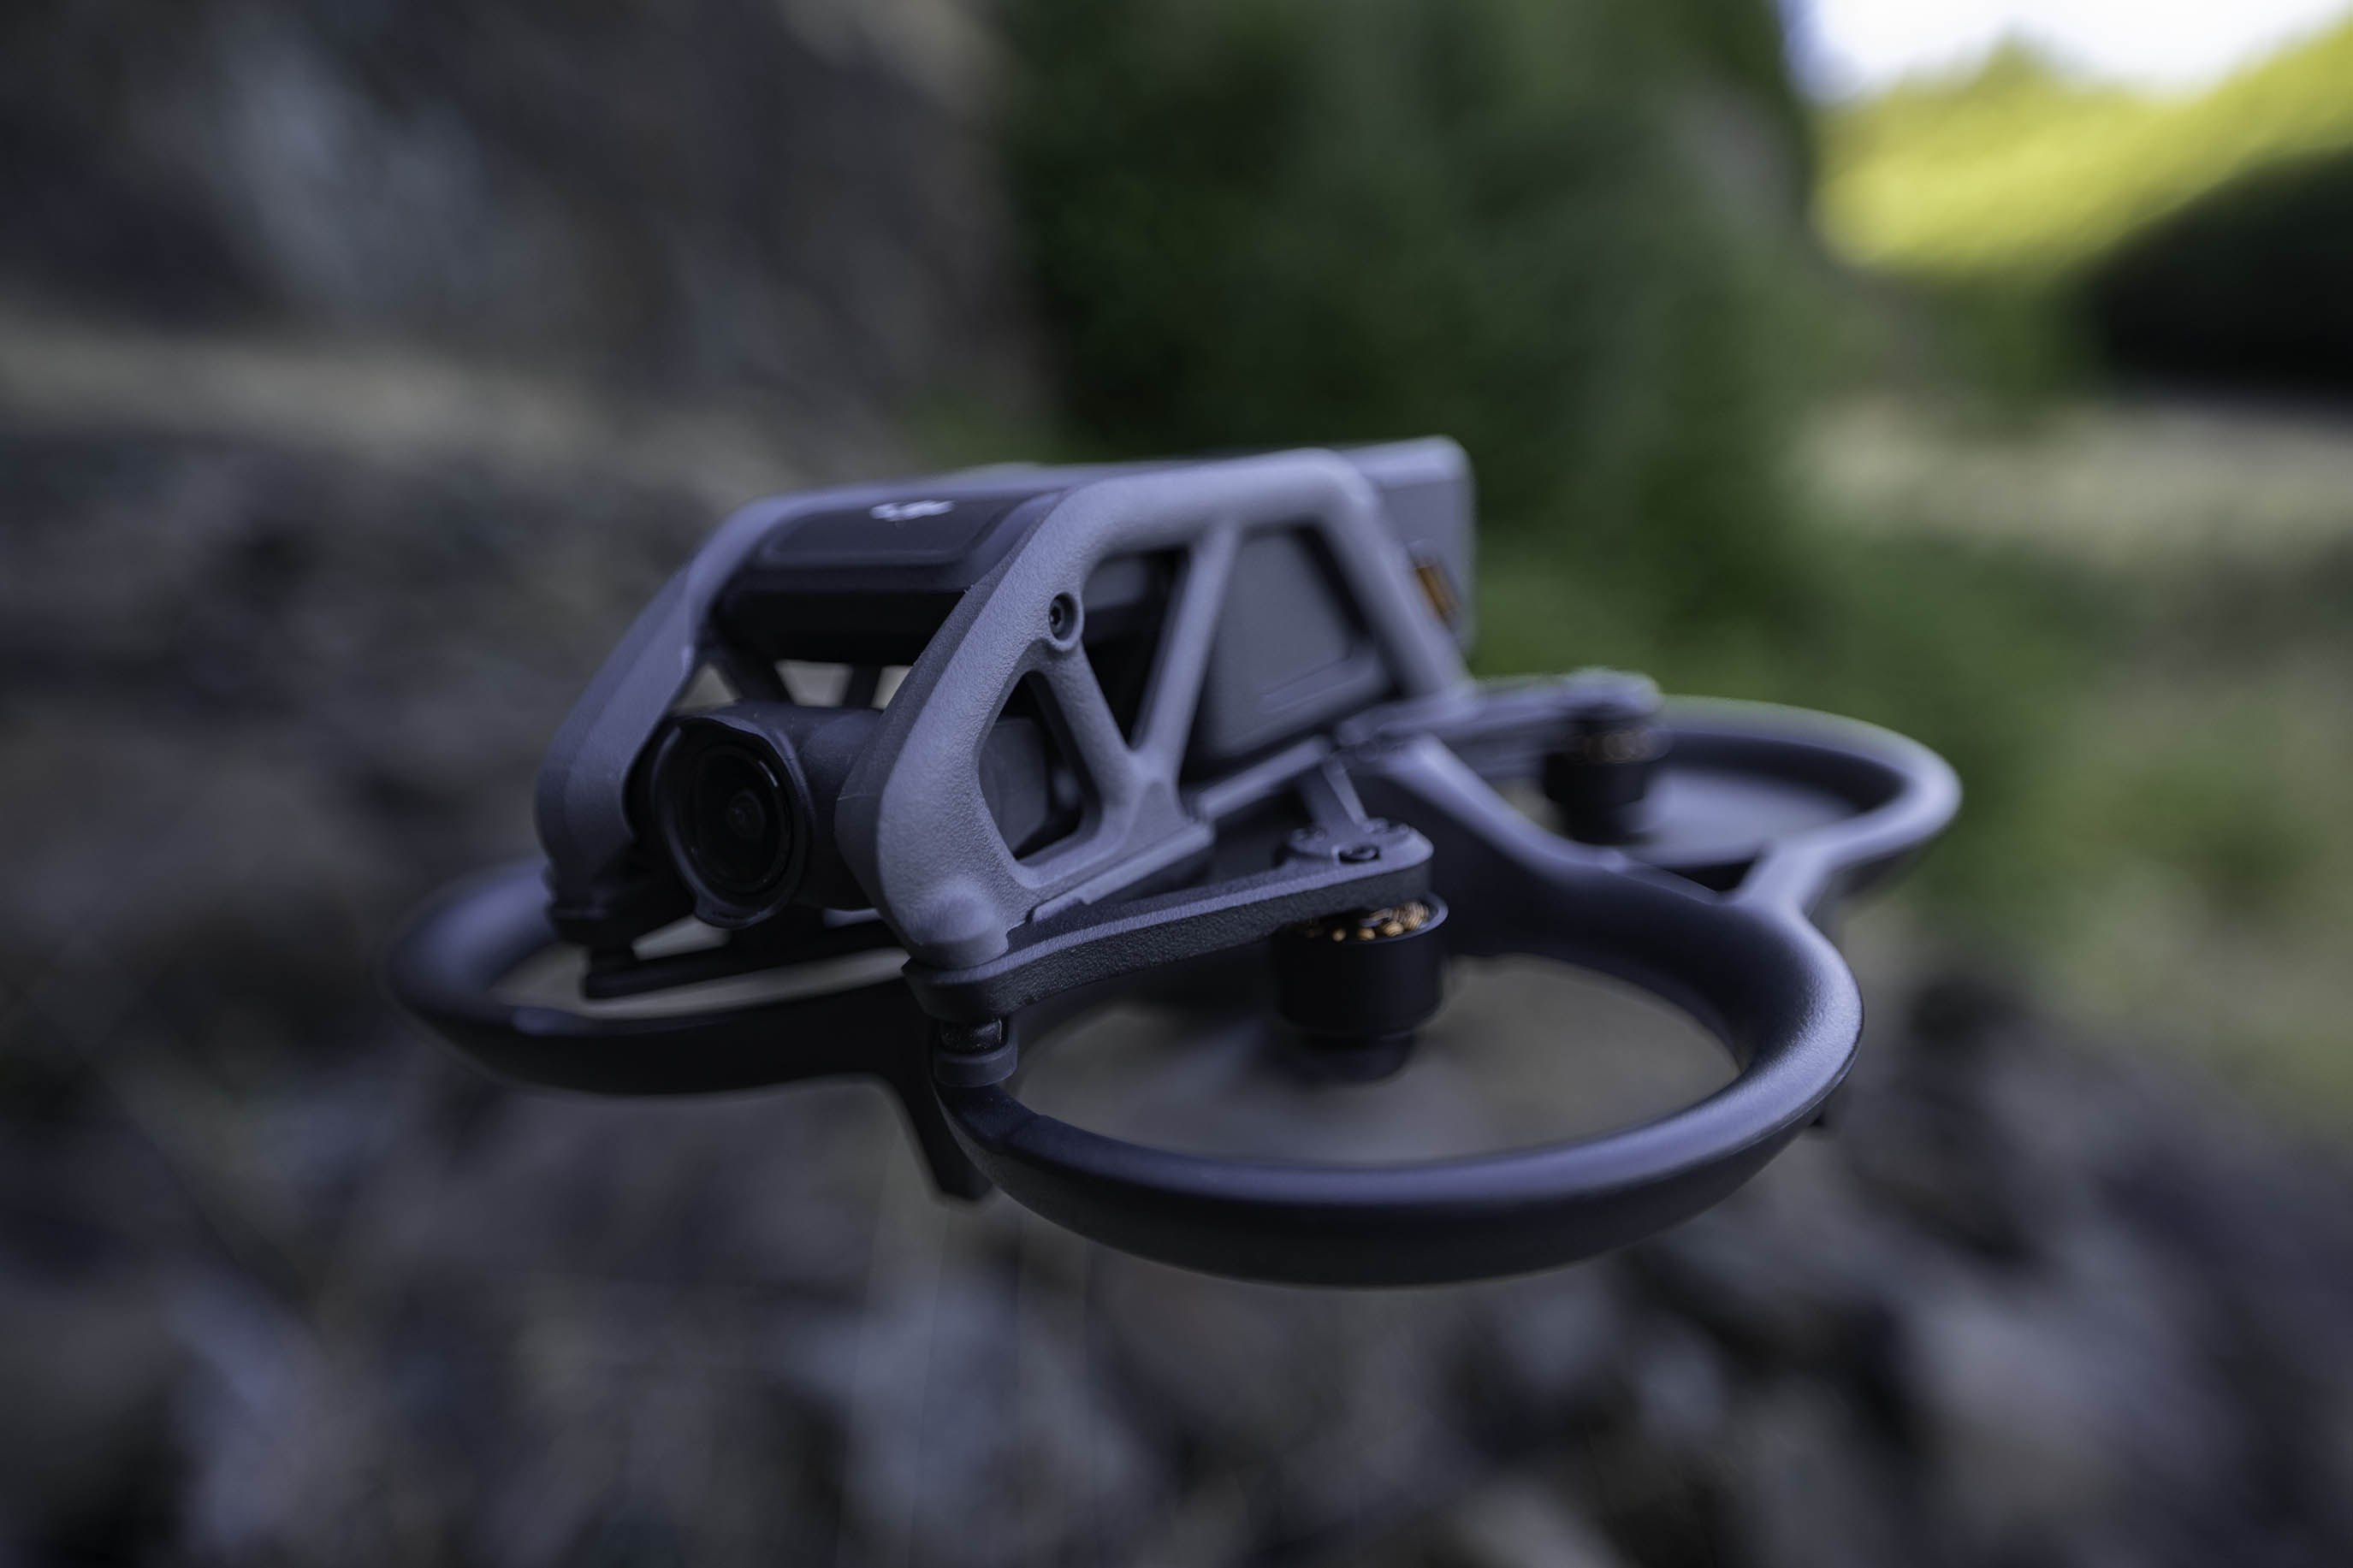 DJI Avata Review: Should you still build your own FPV cinewhoop? - Pilot  Institute